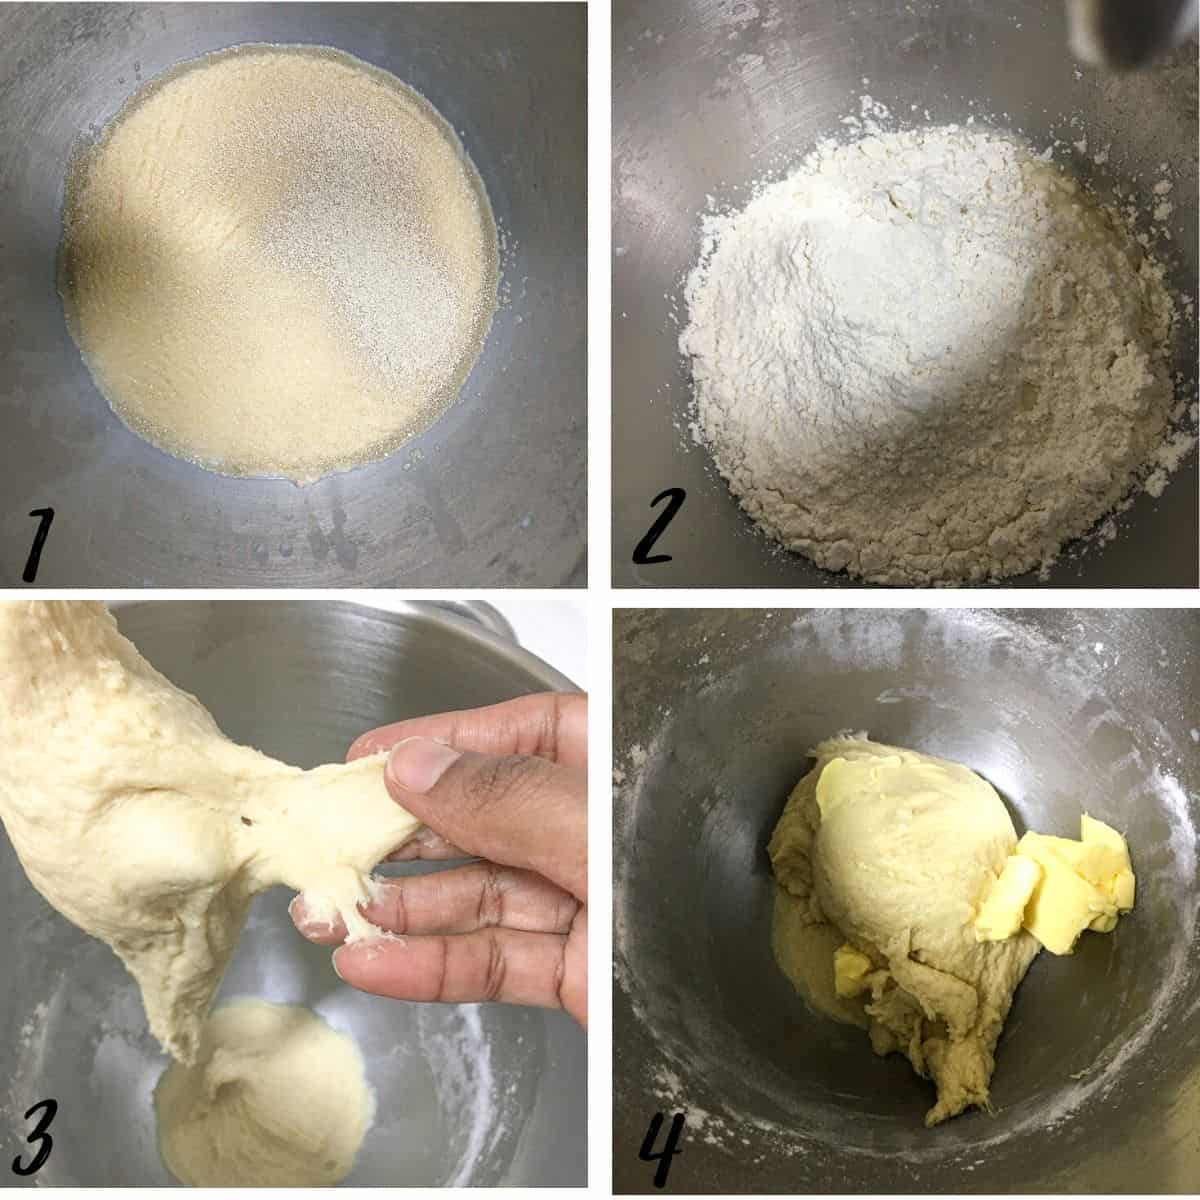 A poster of 4 images showing how to mix dough.